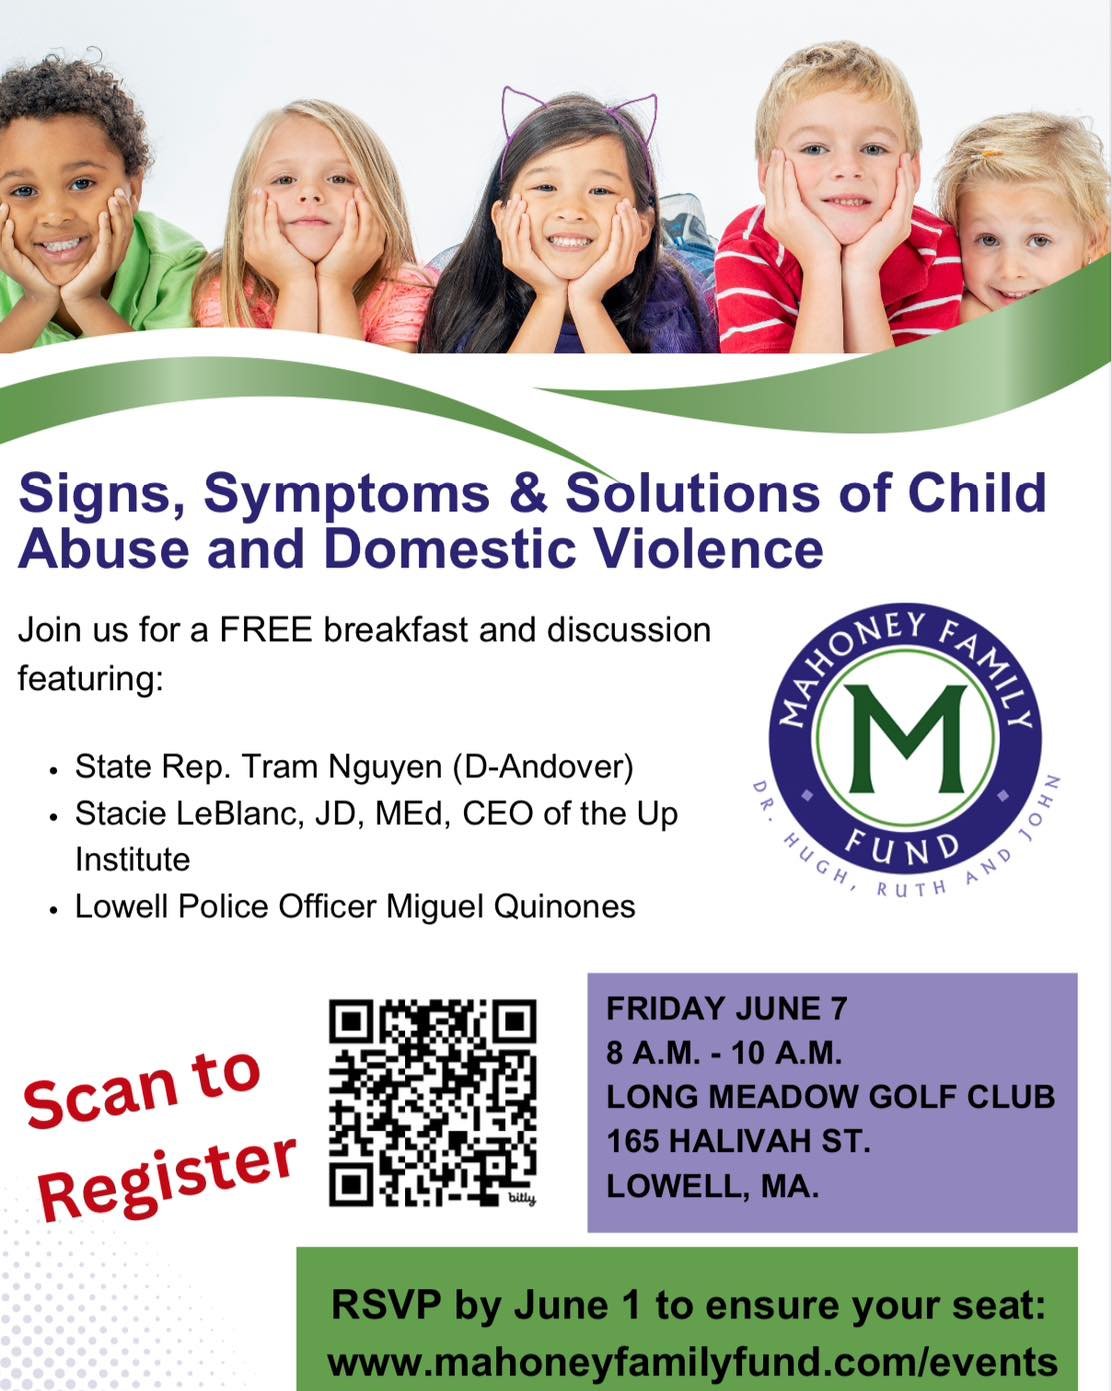 Mahoney Family Fund proudly presents: Signs, Symptoms &amp; Solutions of Child Abuse &amp; Domestic Violence

Friday June 7th 8:00-10:00am

The event is open to all and will be held at the Long Meadow Golf Club,165 Havilah Street, Lowell, MA 01852. 
